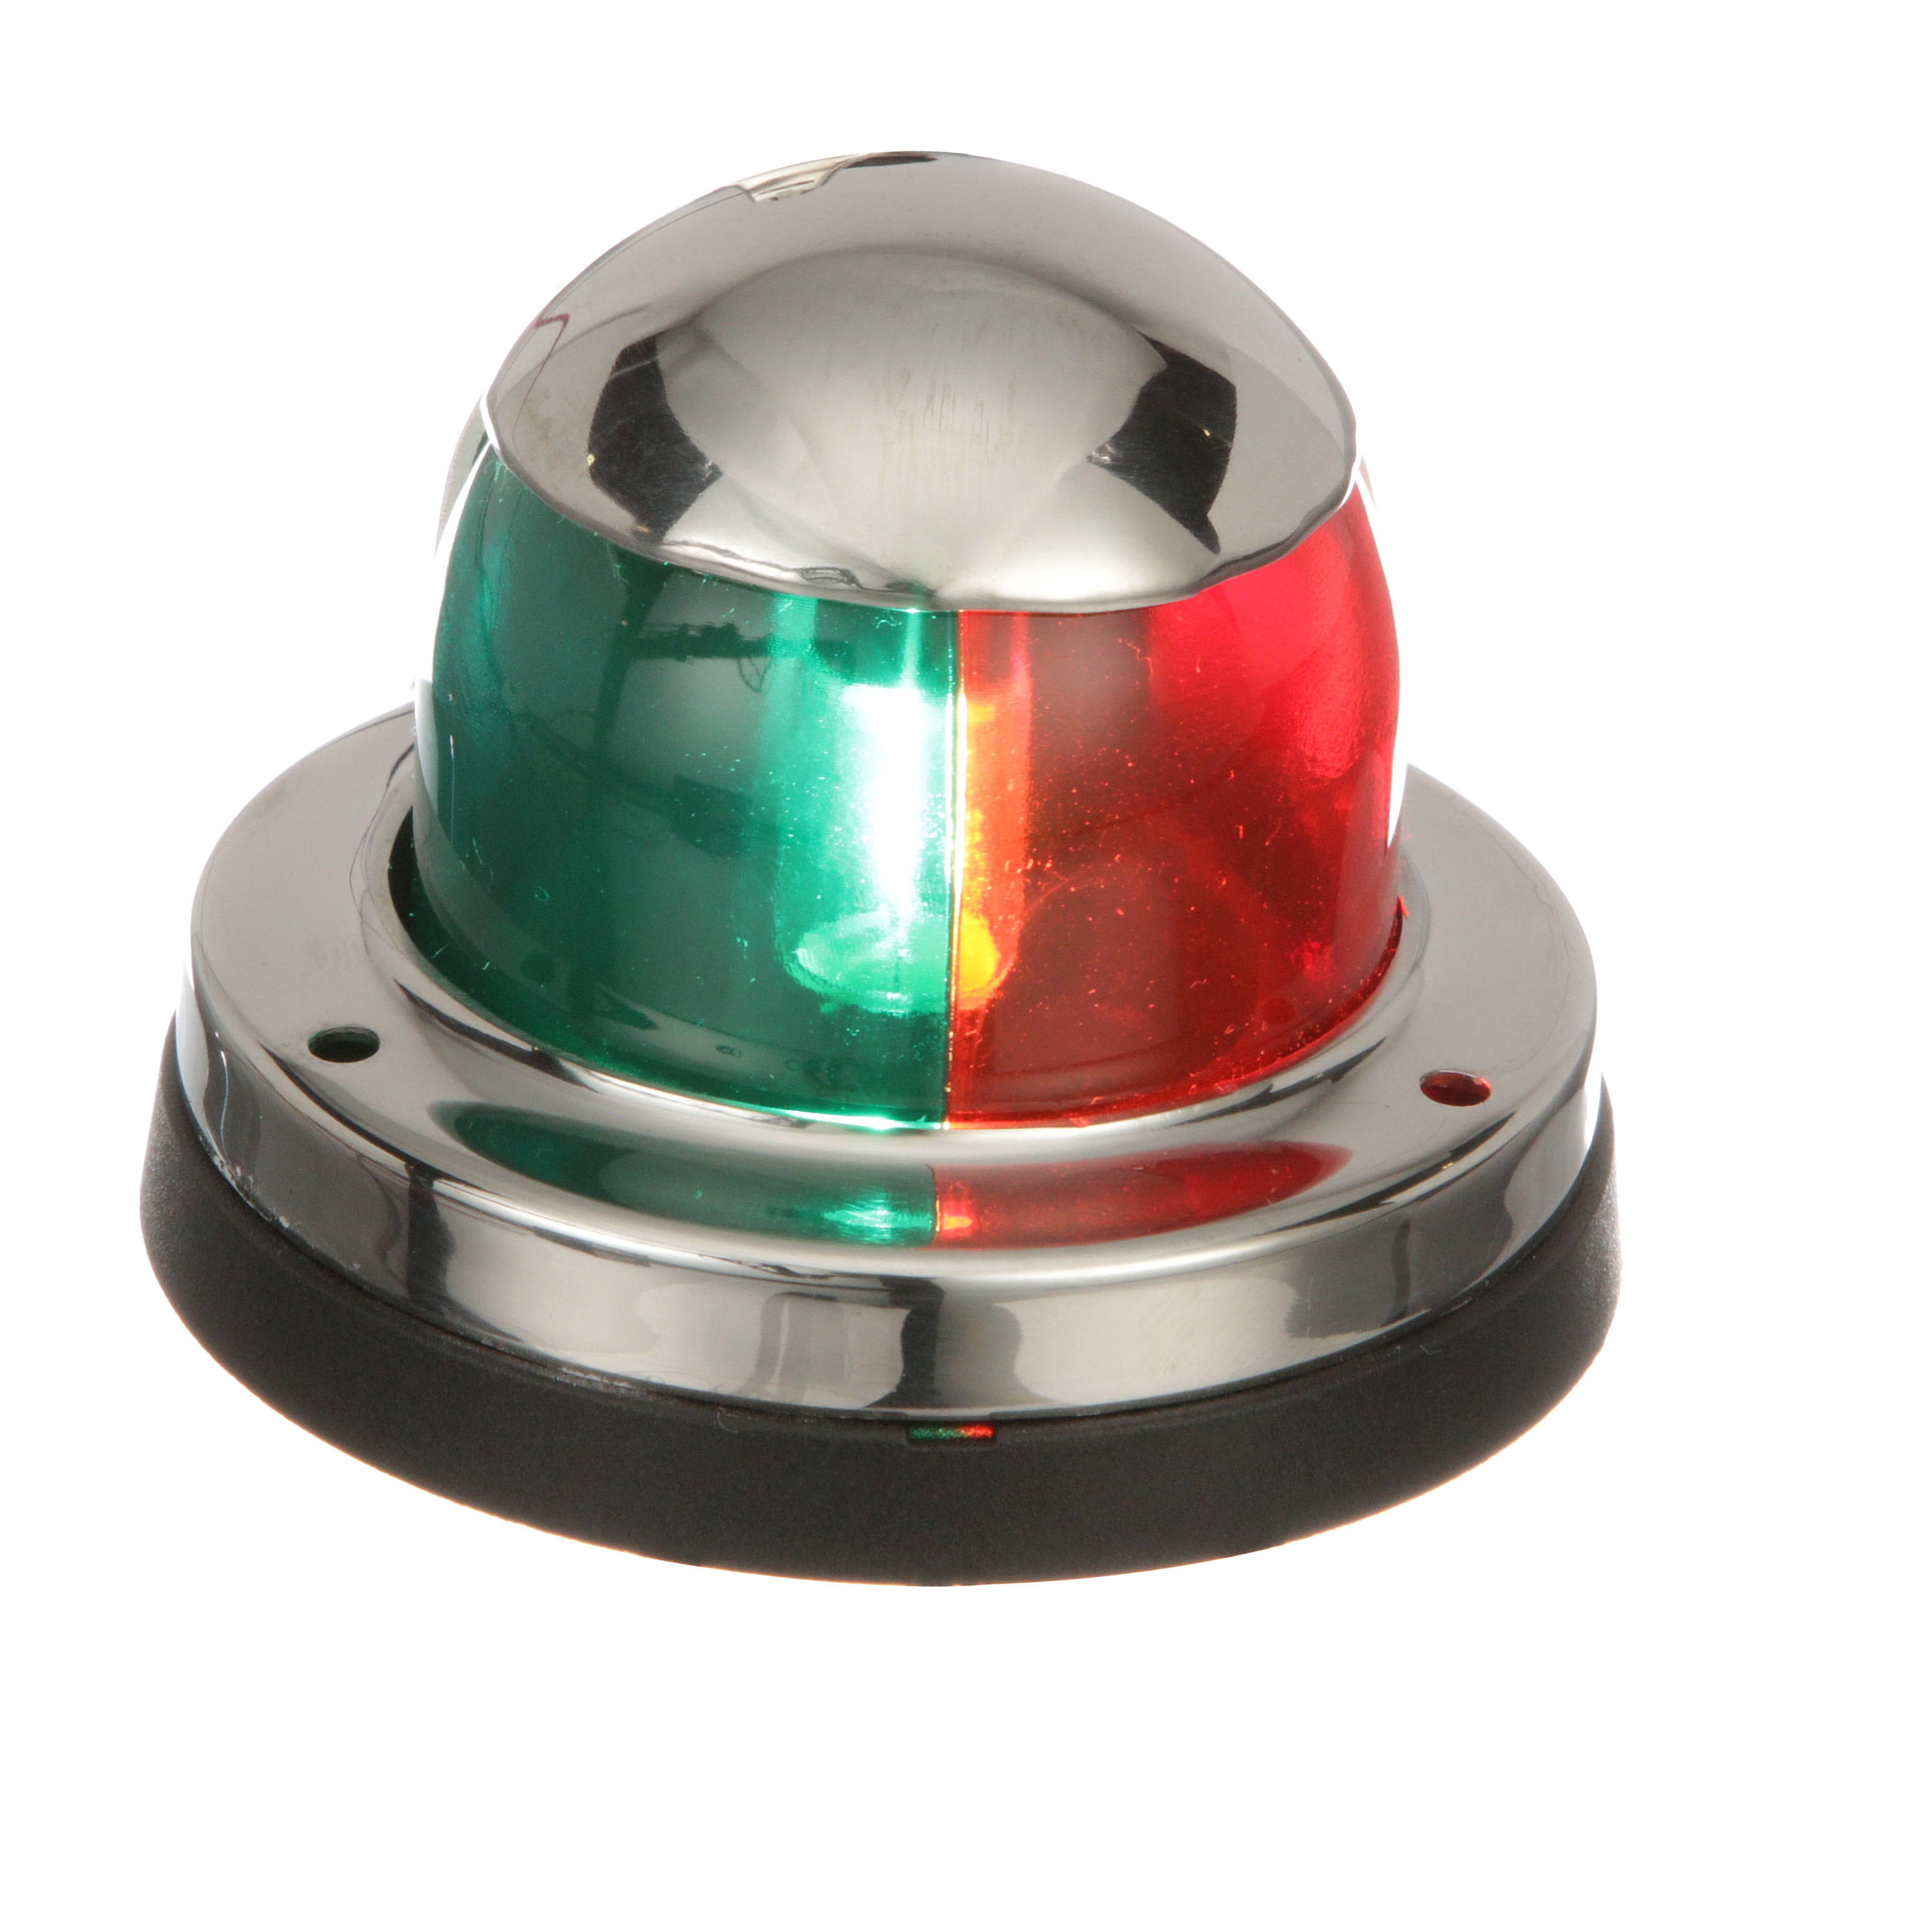 Seachoice LED Bi-Color Red Green Bow Navigation Deck Light SCP 02021 